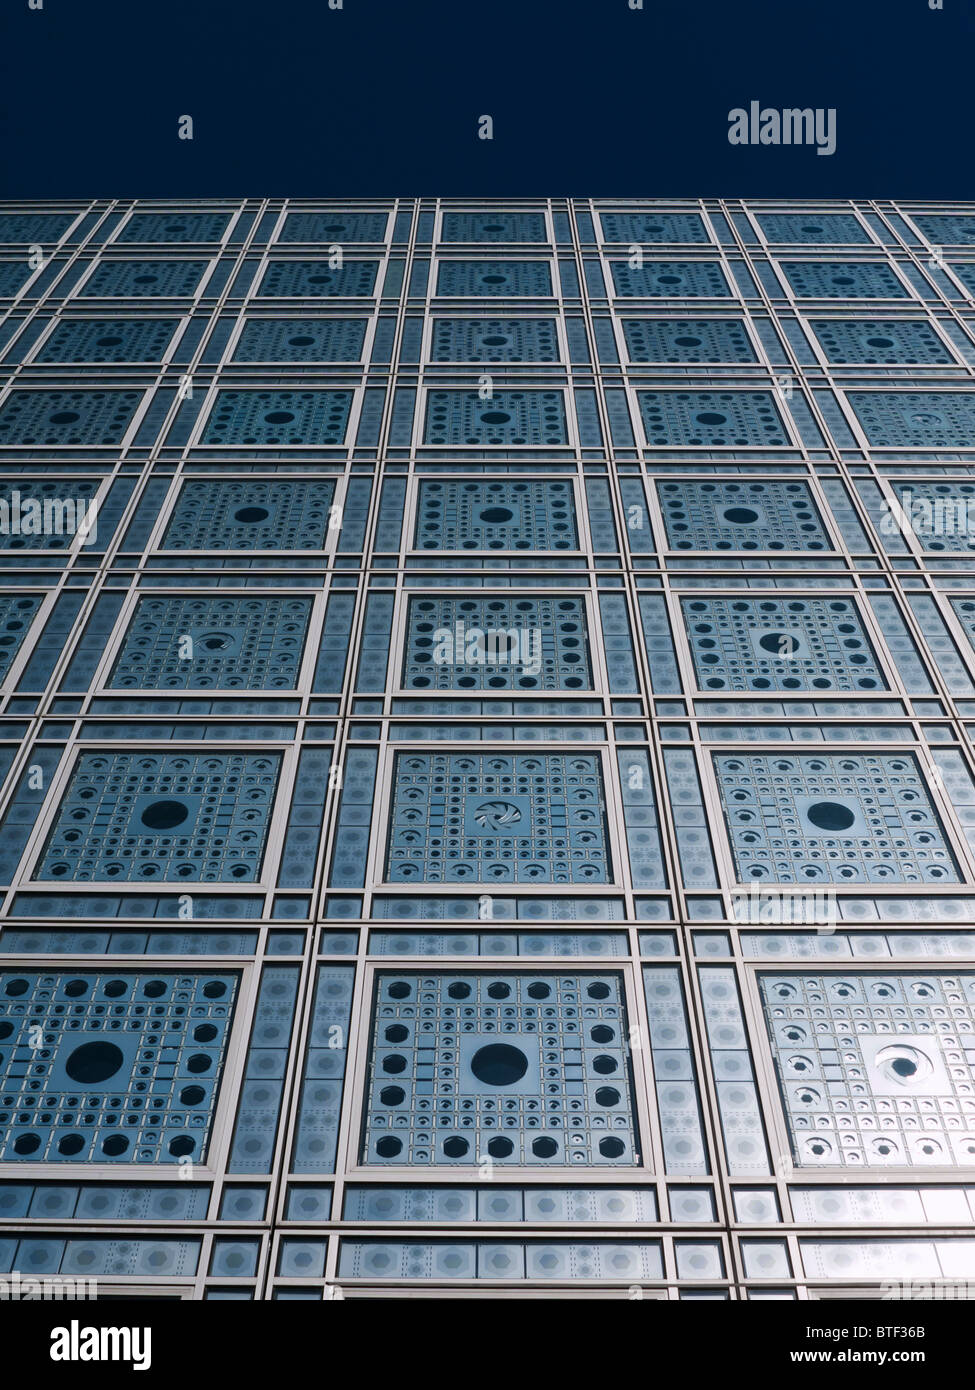 Exterior view of light sensitive facade and windows in the Institut du Monde Arabe in Paris France Architect Jean Nouvel Stock Photo